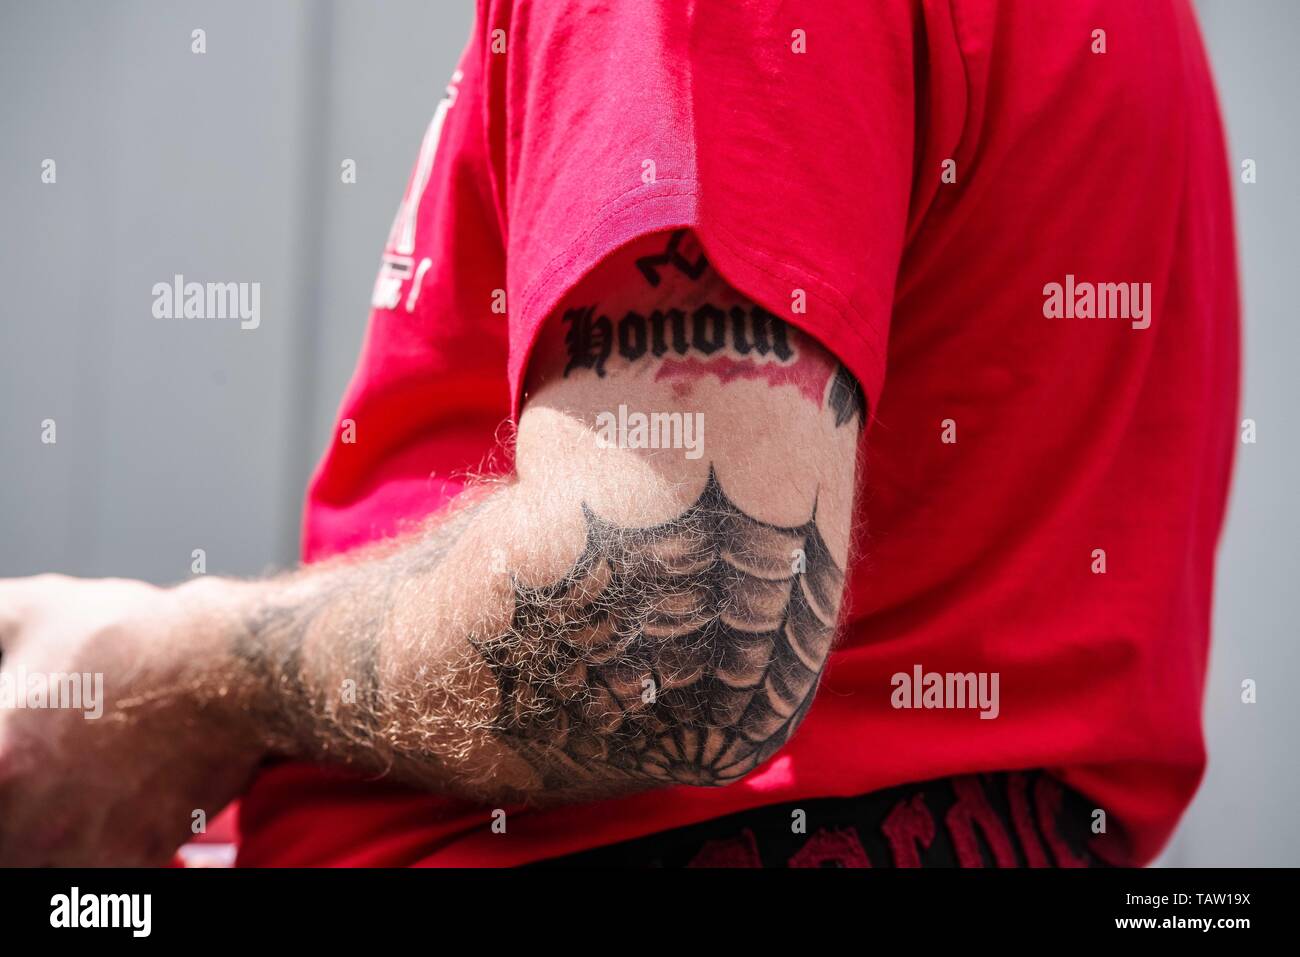 Dortmund, Nordrhein Westfalen, Germany. 25th May, 2019. A neonazi at an event in Dortmund displays a portion of a ''Blood and Honour'' tattoo, denoting membership to this banned terror group, as well as a 777 Triskele above it. Prior to the European Elections, the neonazi party Die Rechte (The Right) organized a rally in the German city of Dortmund to promote their candidate, the incarcerated Holocaust denier Ursula Haverbeck. The demonstration and march were organized by prominent local political figure and neonazi activist Michael Brueck (Michael BrÃ¼ck) who enlisted the help of not only G Stock Photo